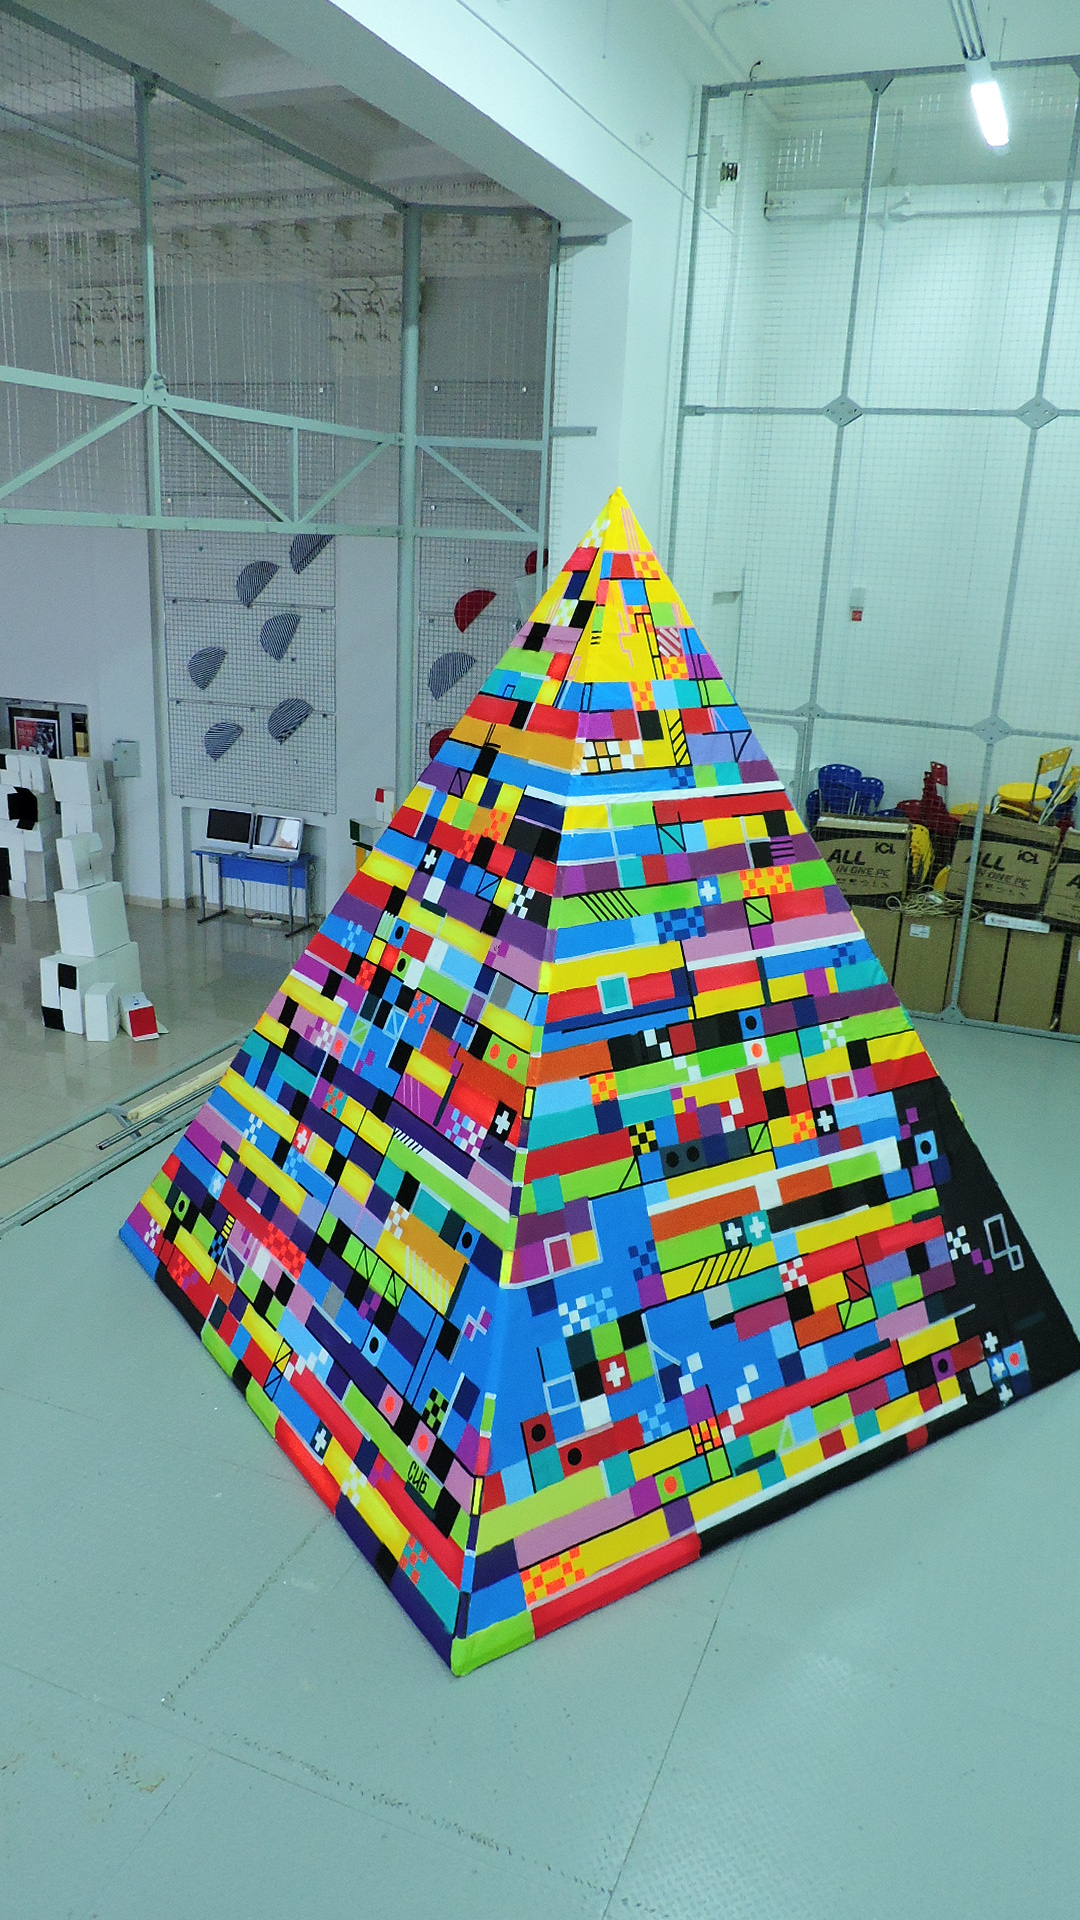 The pyramid is assembled from a rigid frame and PVC fabric.